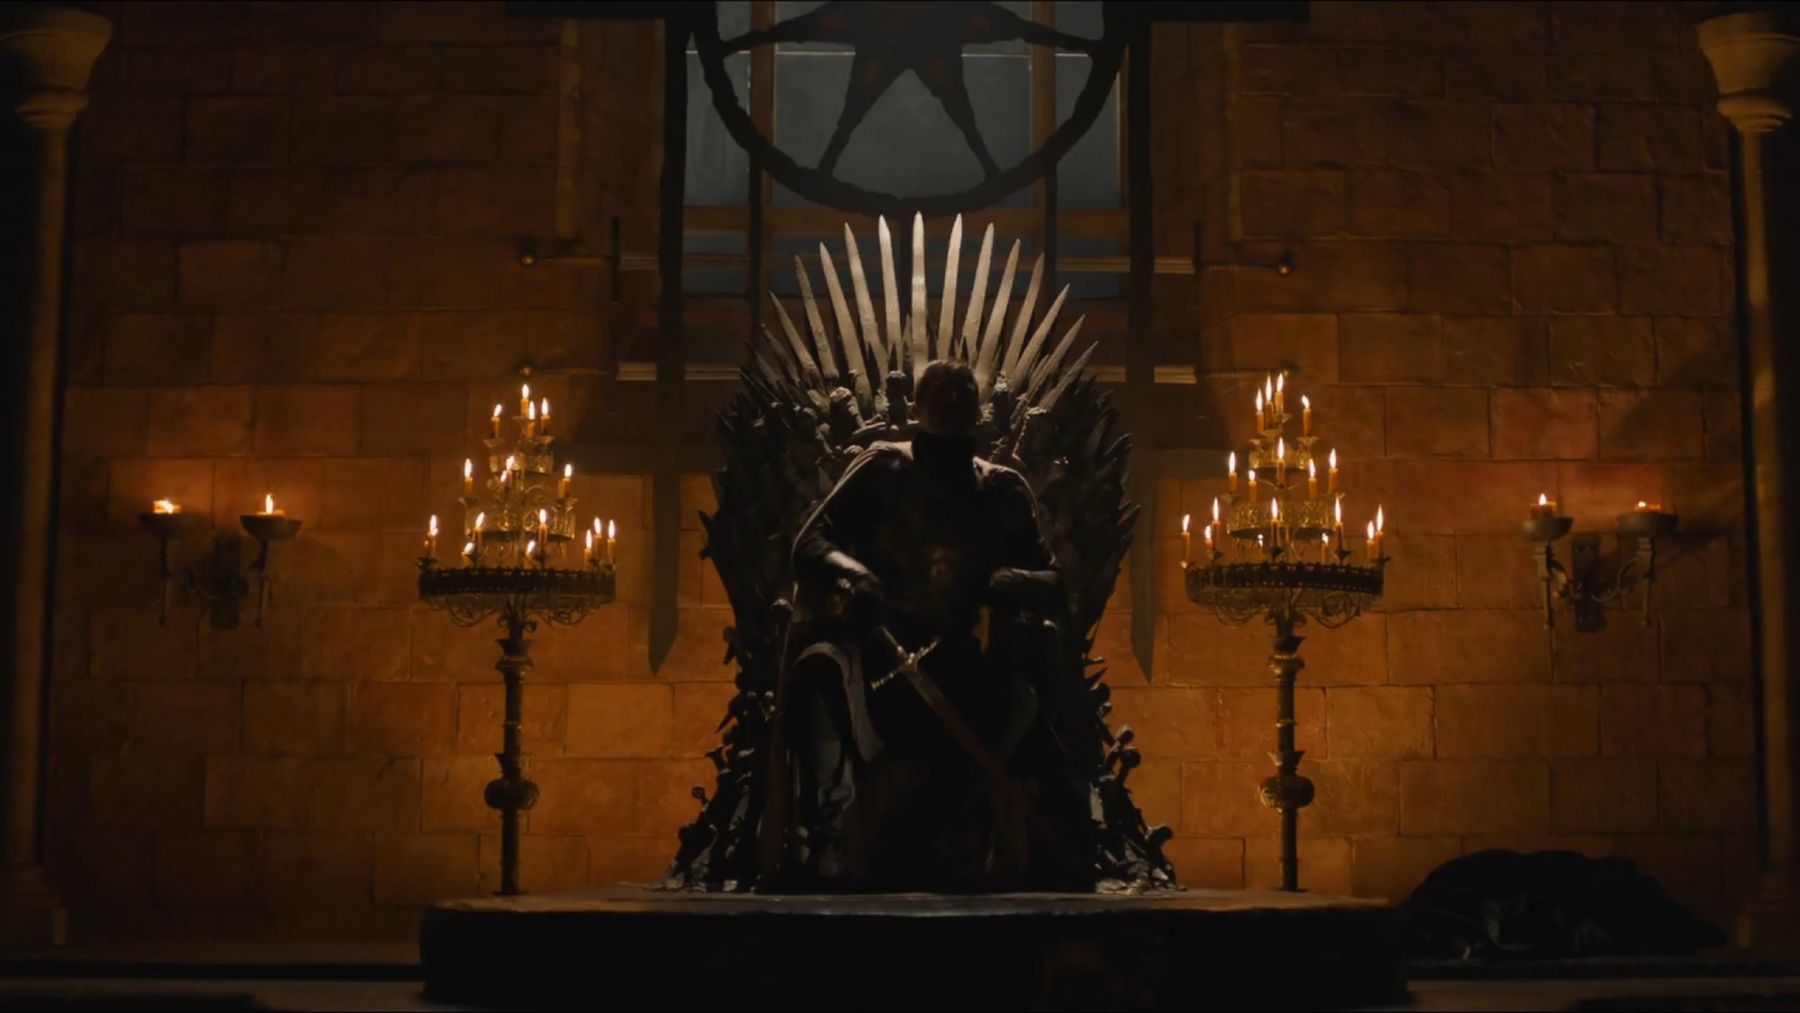 Who will sit on the Iron Throne?